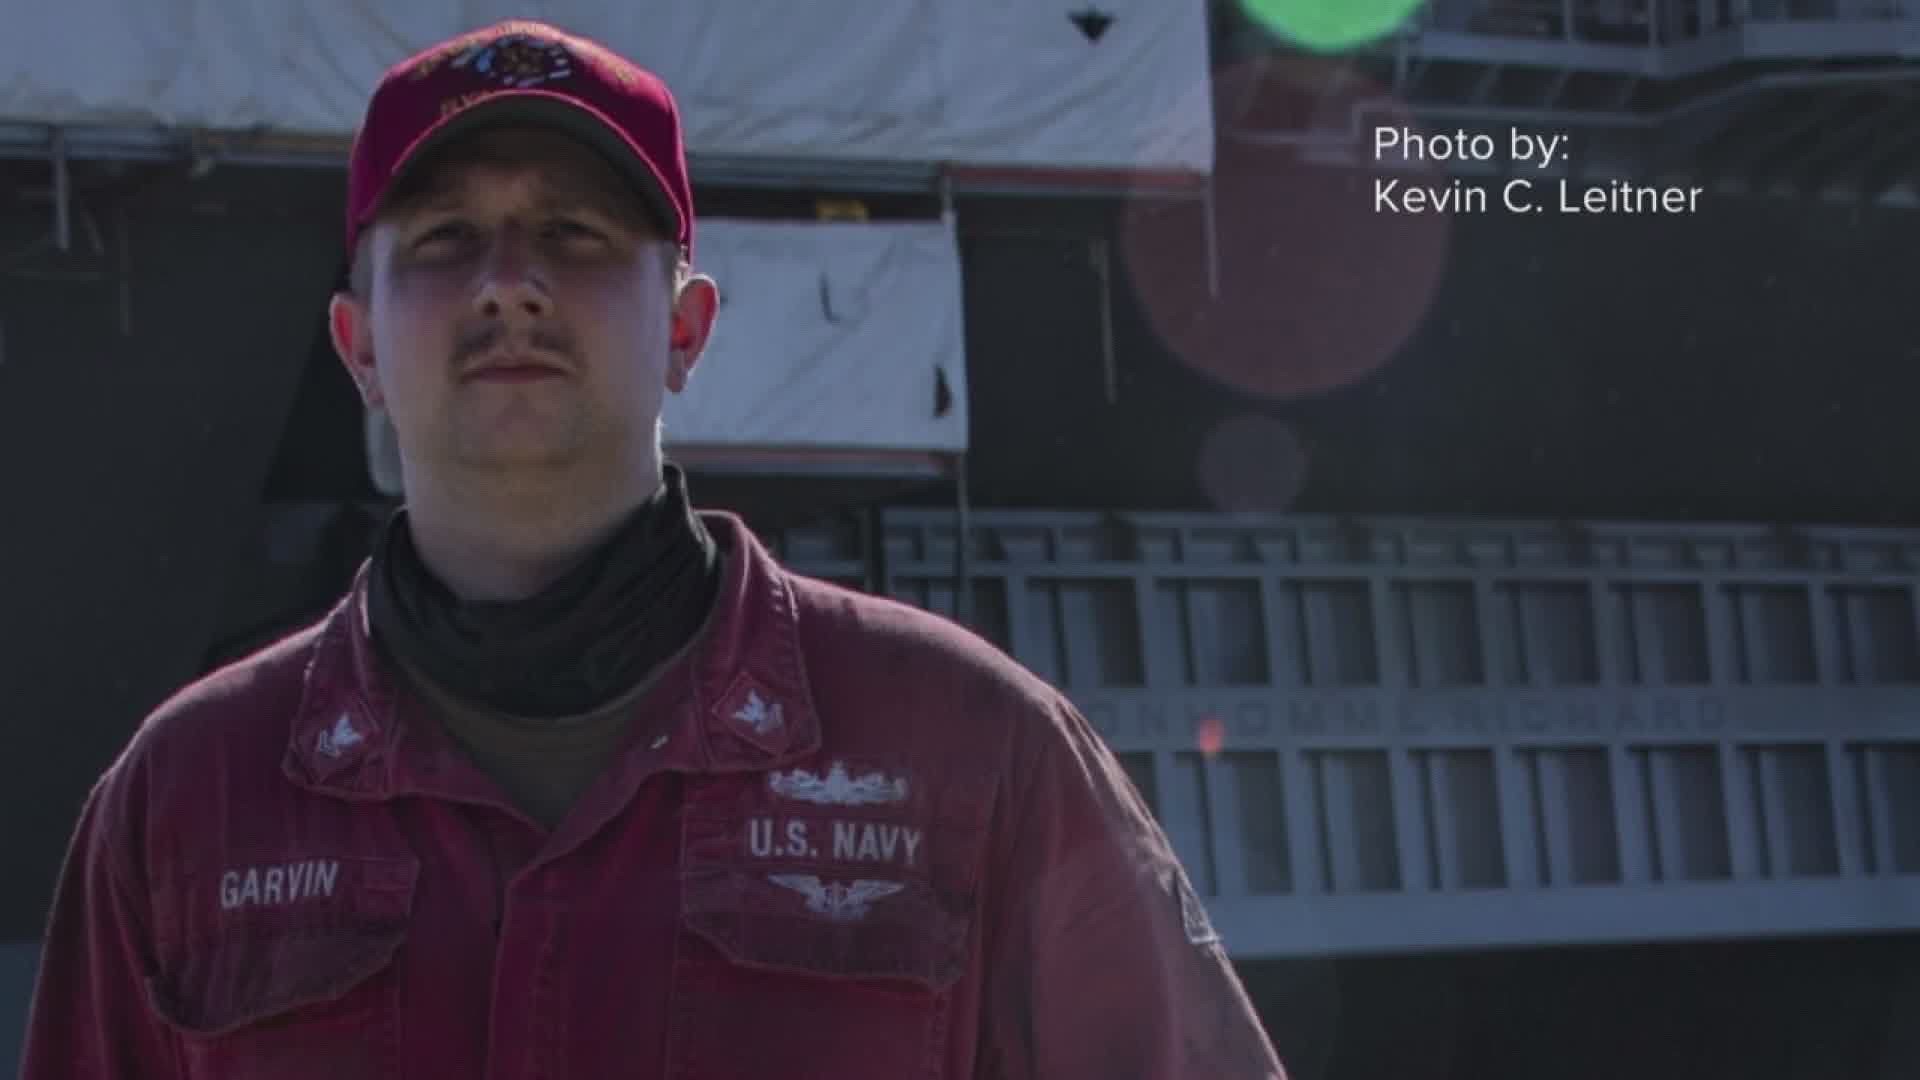 A West Michigan sailor recently helped respond to a disaster.